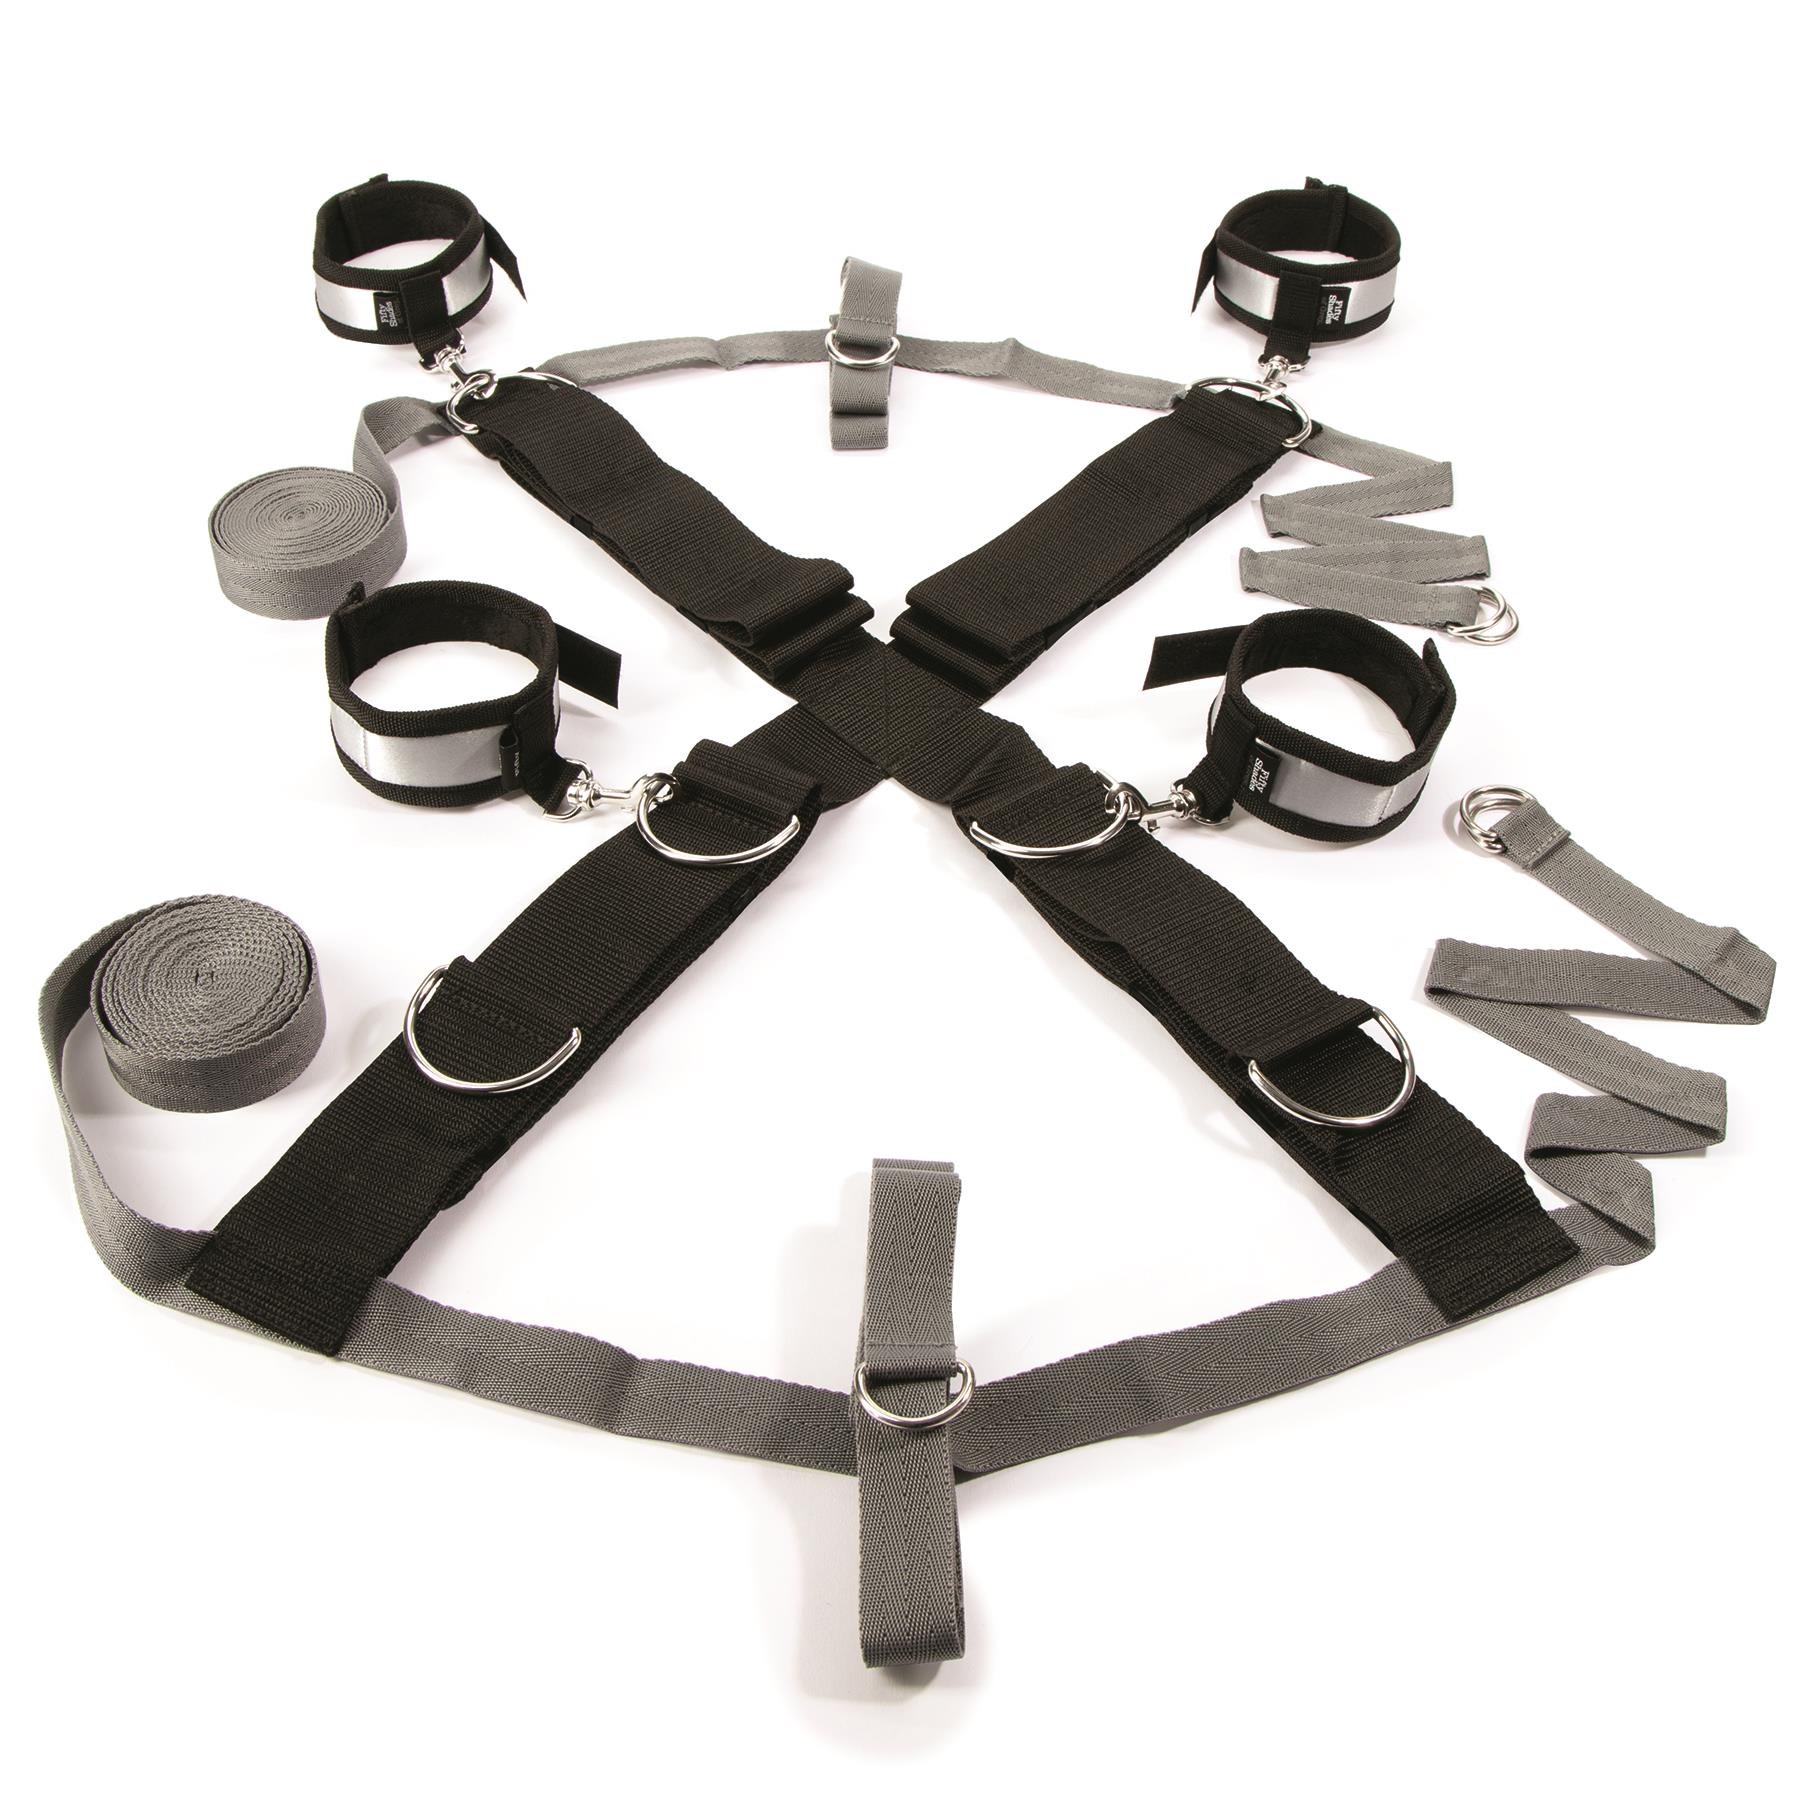 Fifty Shades of Grey Keep Fifty Shades of Grey Keep Still Over the Bed Cross Restraints Product Shot